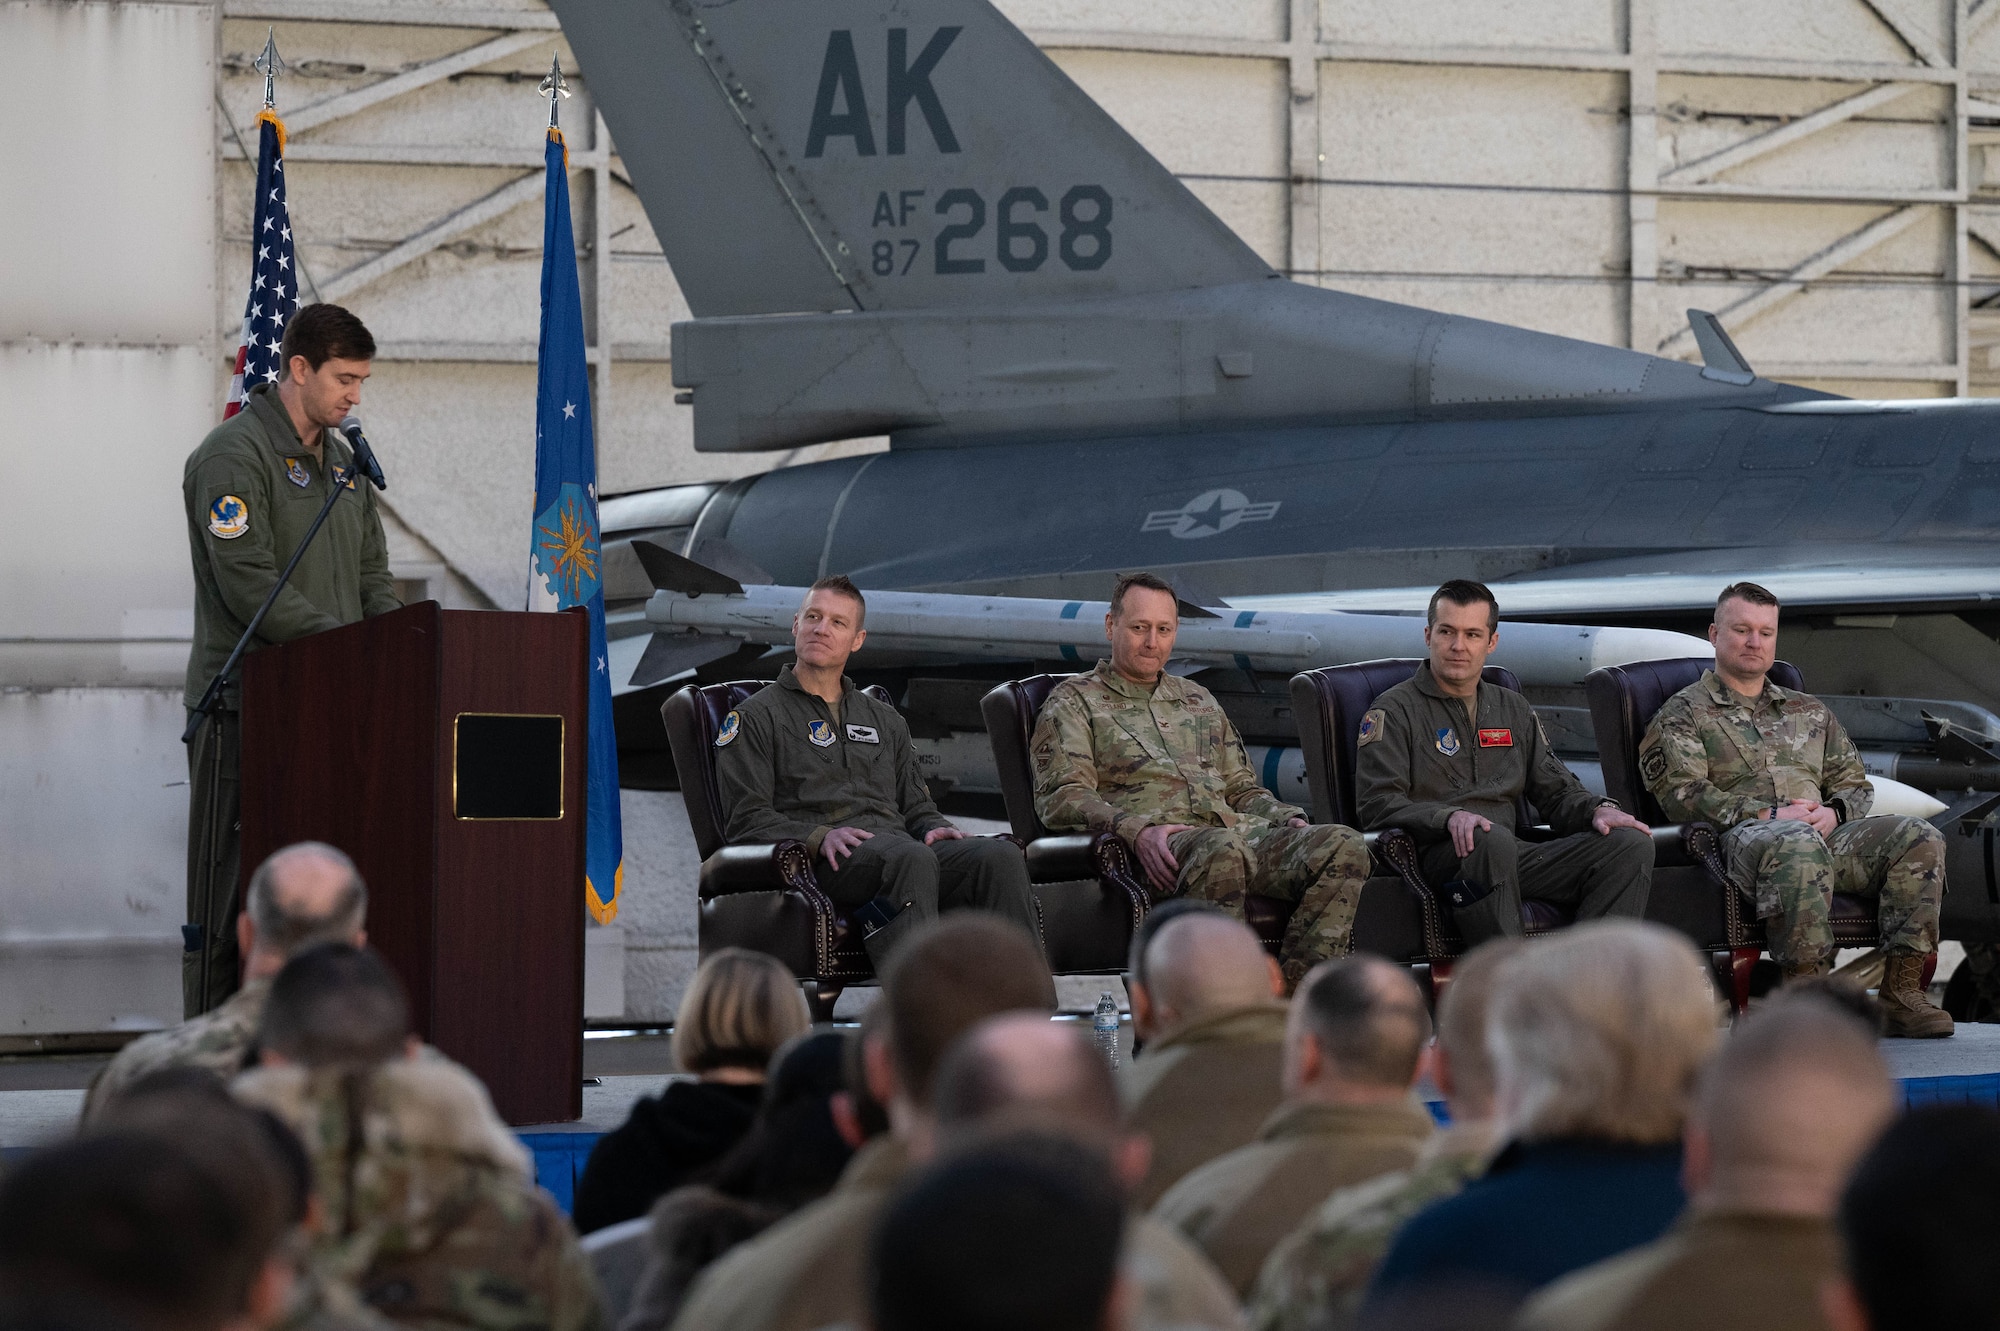 A U.S. Air Force Major introduces members of the official party during a ceremony at Eielson Air Force Base, Alaska.